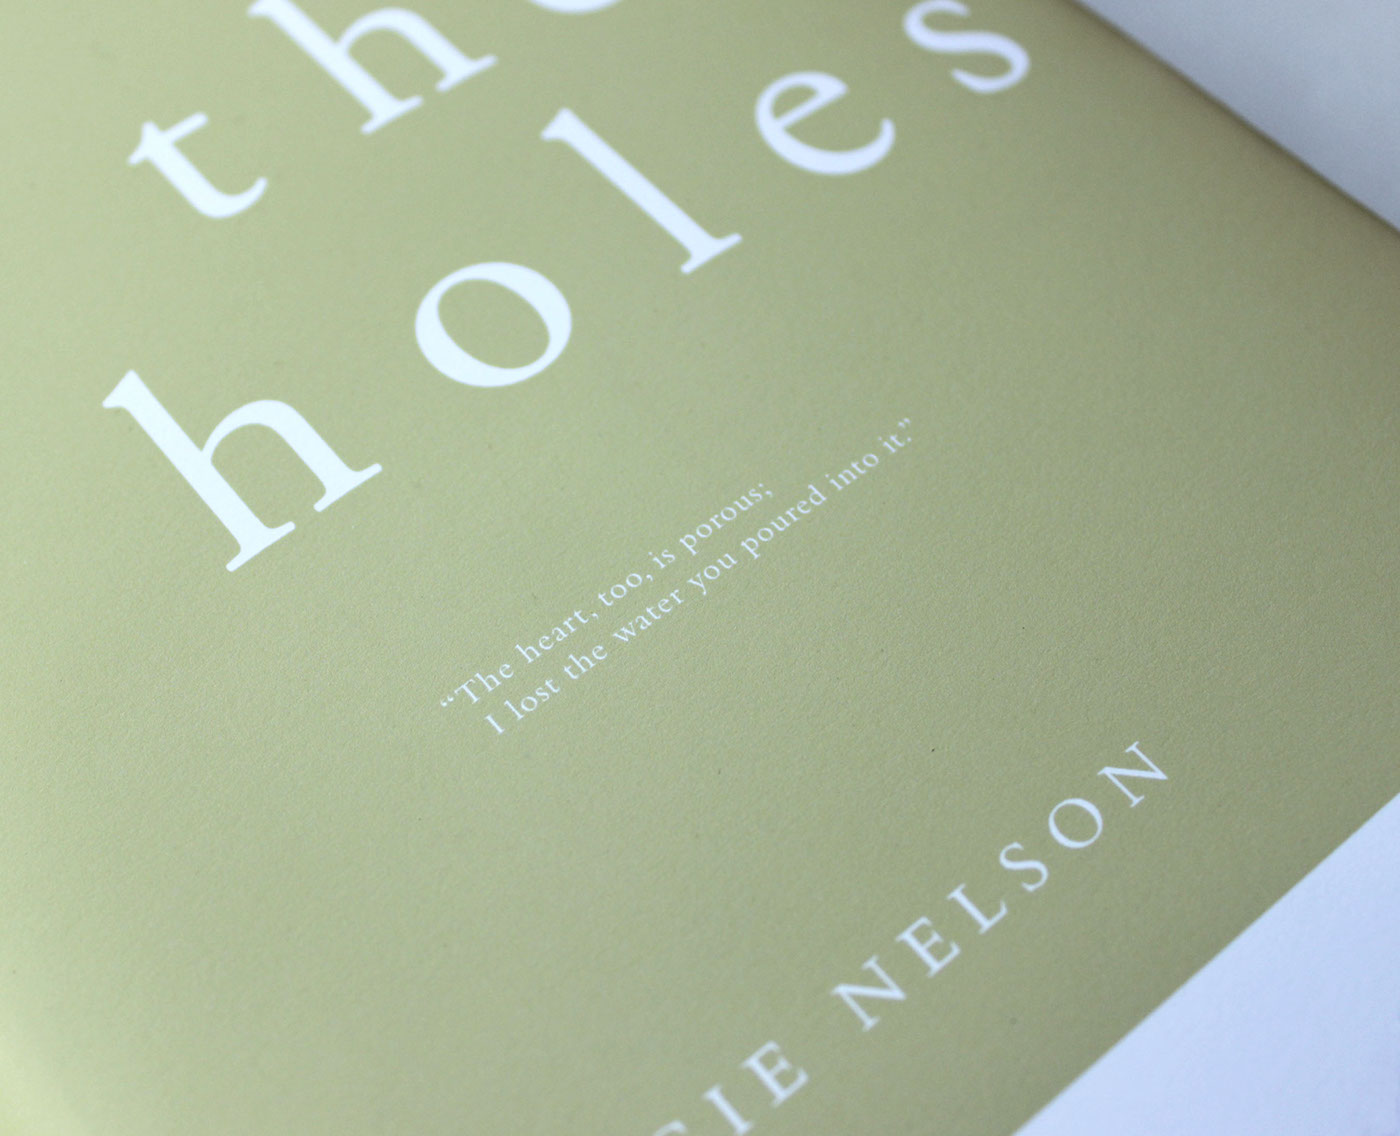 graphic design  dust jacket book cover maggie nelson Photography  Garamond print design  typography   book